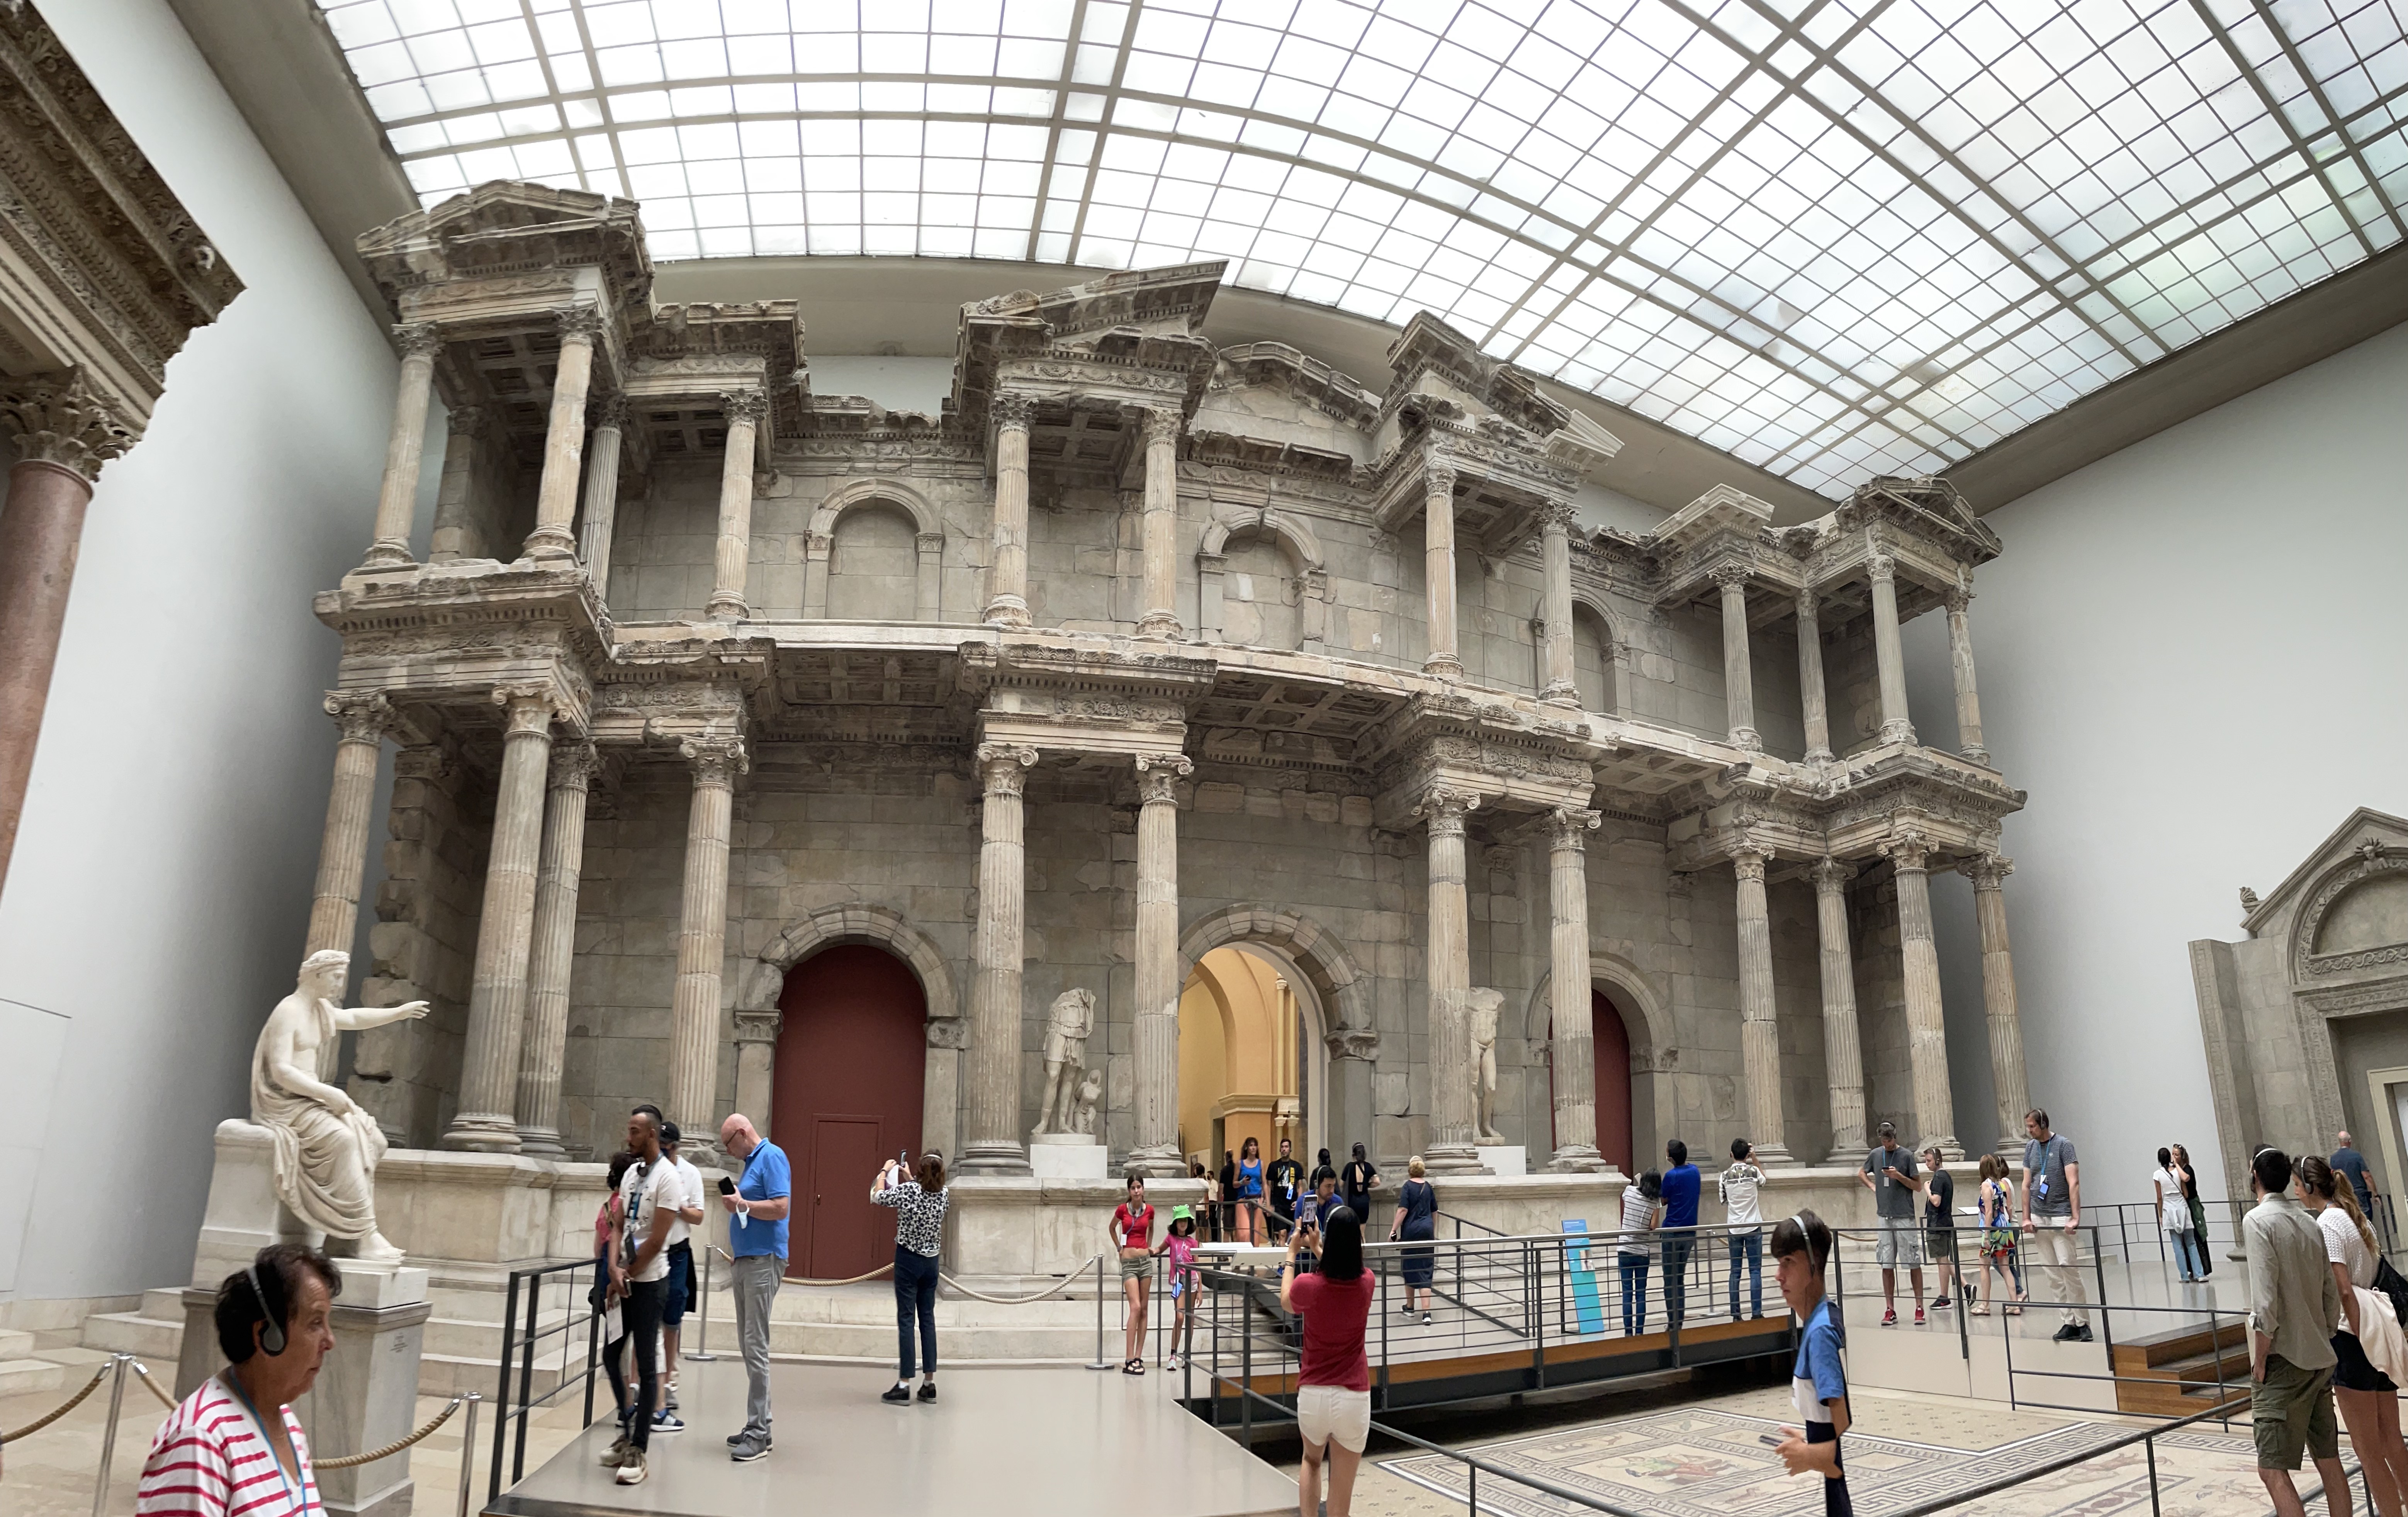 The size of the structure goes to show the immense wealth of the Roman Empire at its height.